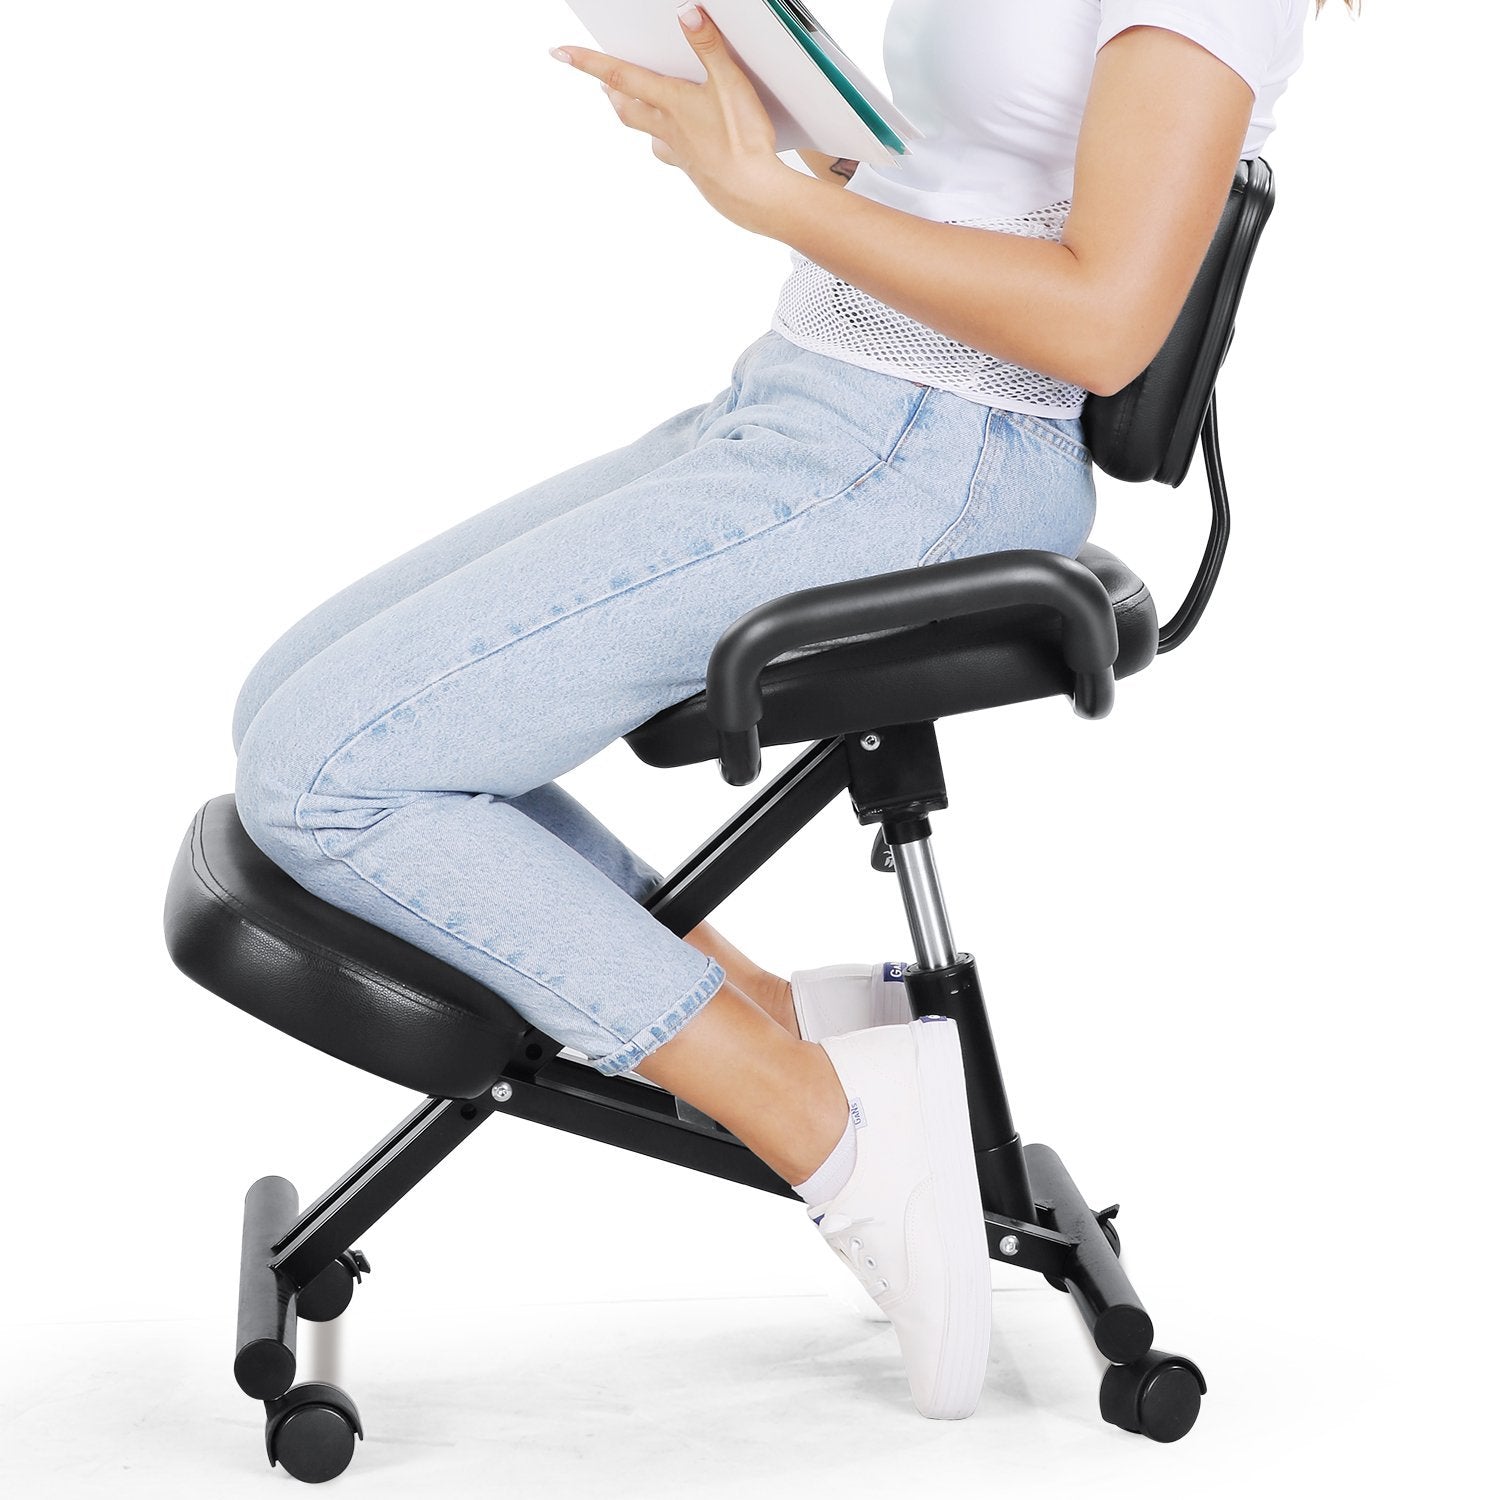 Load image into Gallery viewer, MaxKare Ergonomic Kneeling Chair Office Home Chair with Adjustable Height for Posture Correct| Bad Backs | Neck Pain Relieving | Spine Tension Relief-Thick Comfortable Cushion - NAIPO
